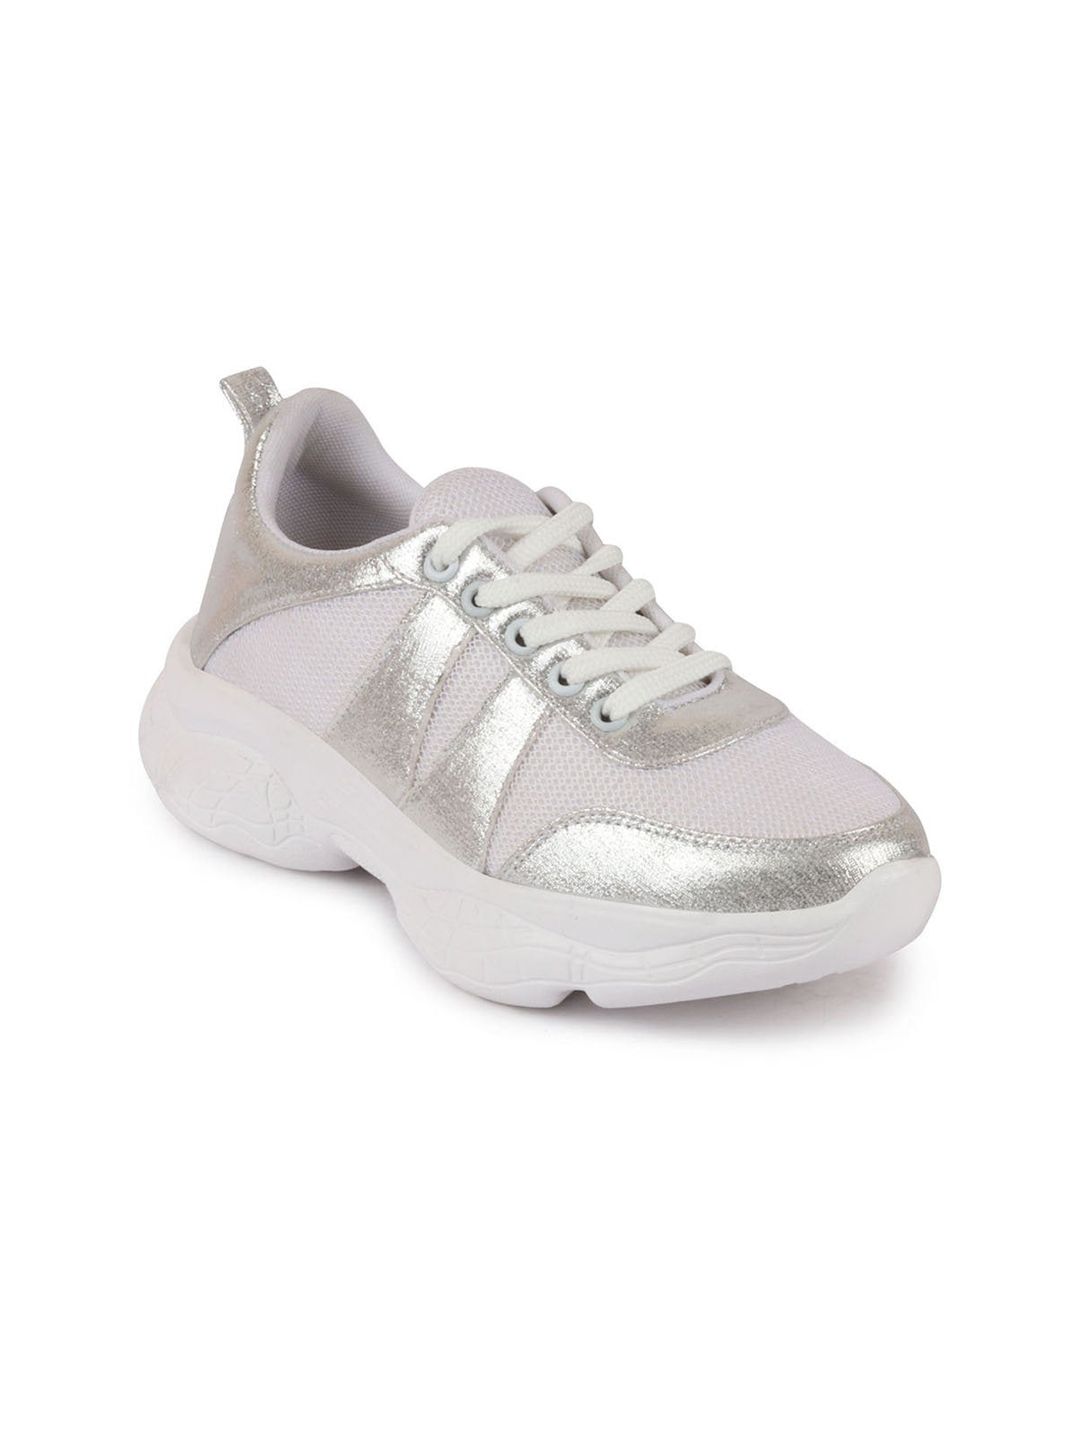 FAUSTO Women Woven Design Lightweight Sneakers Price in India